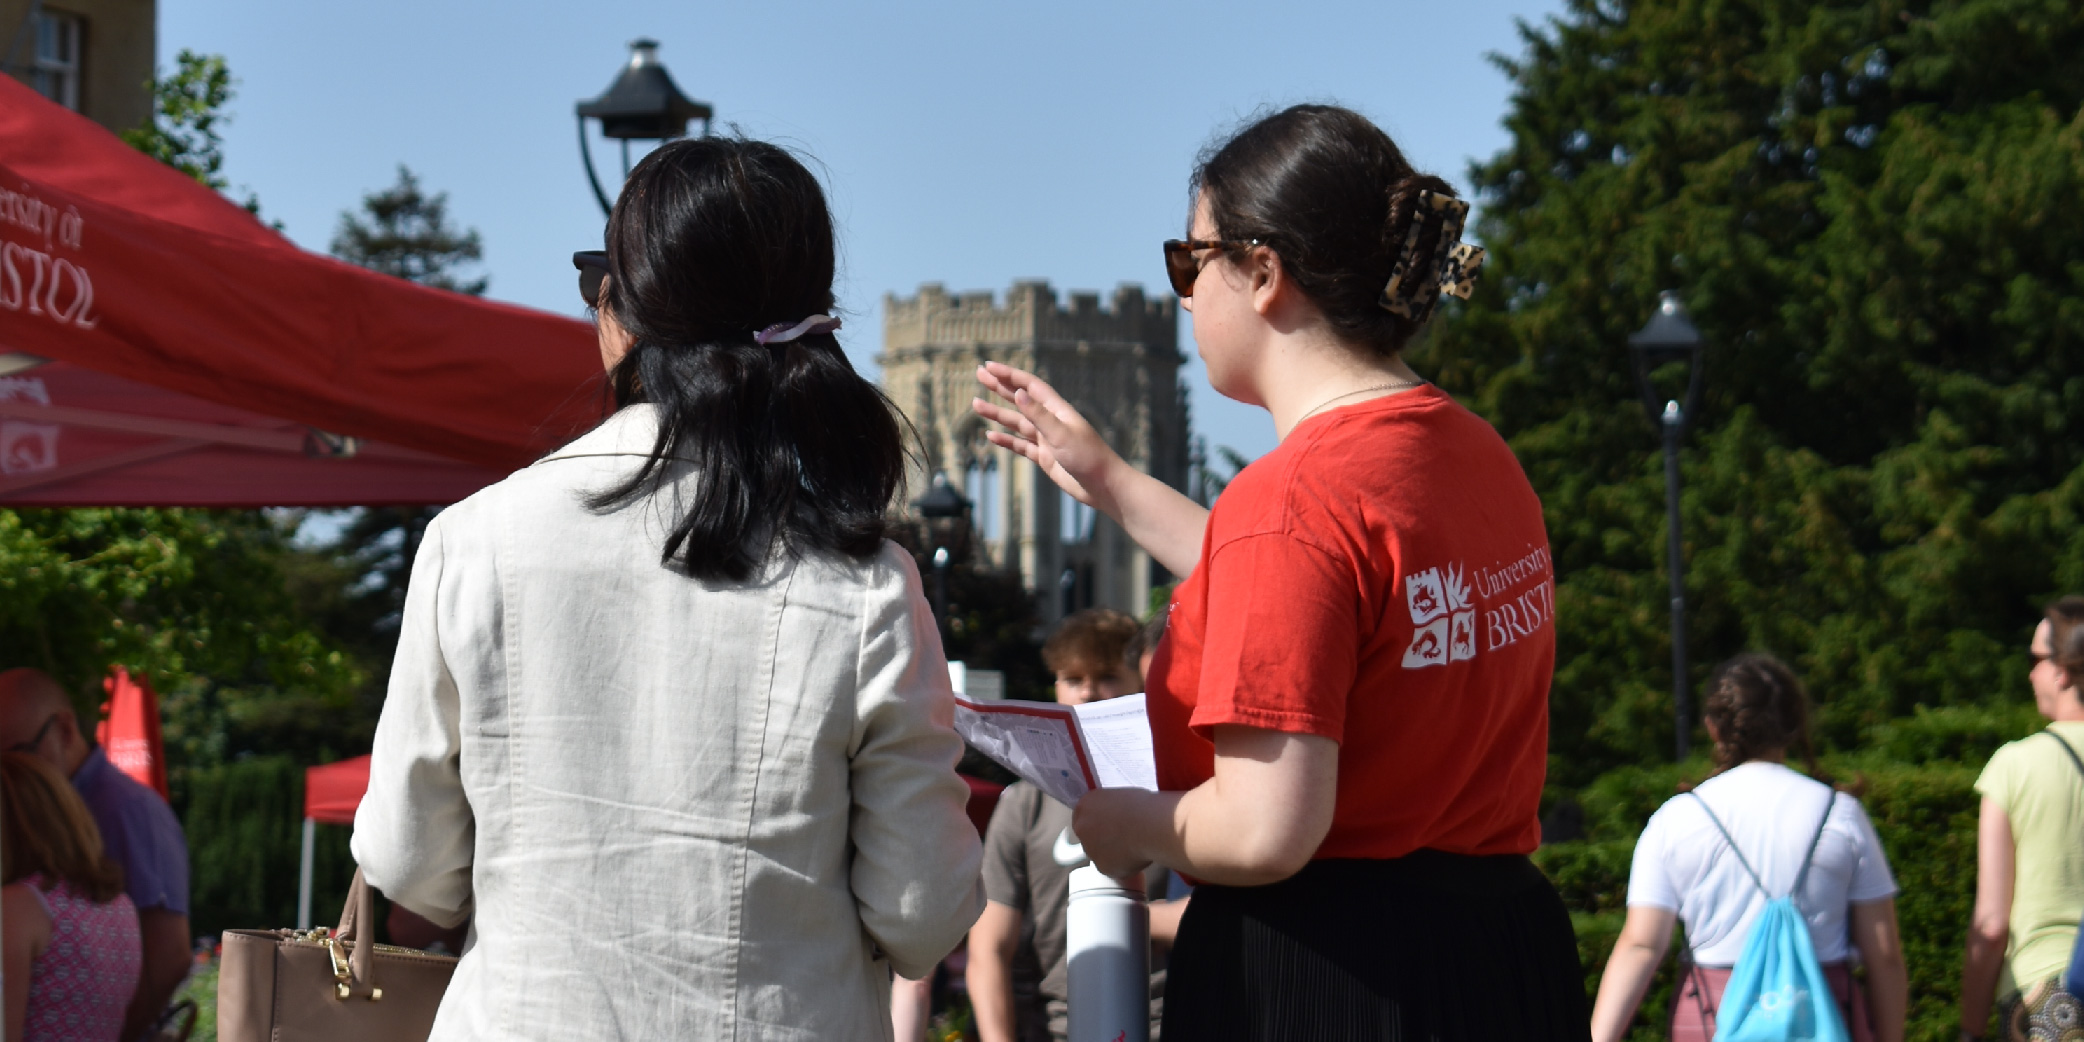 A student ambassador directing a prospective student, with Will's Memorial Building in the background.